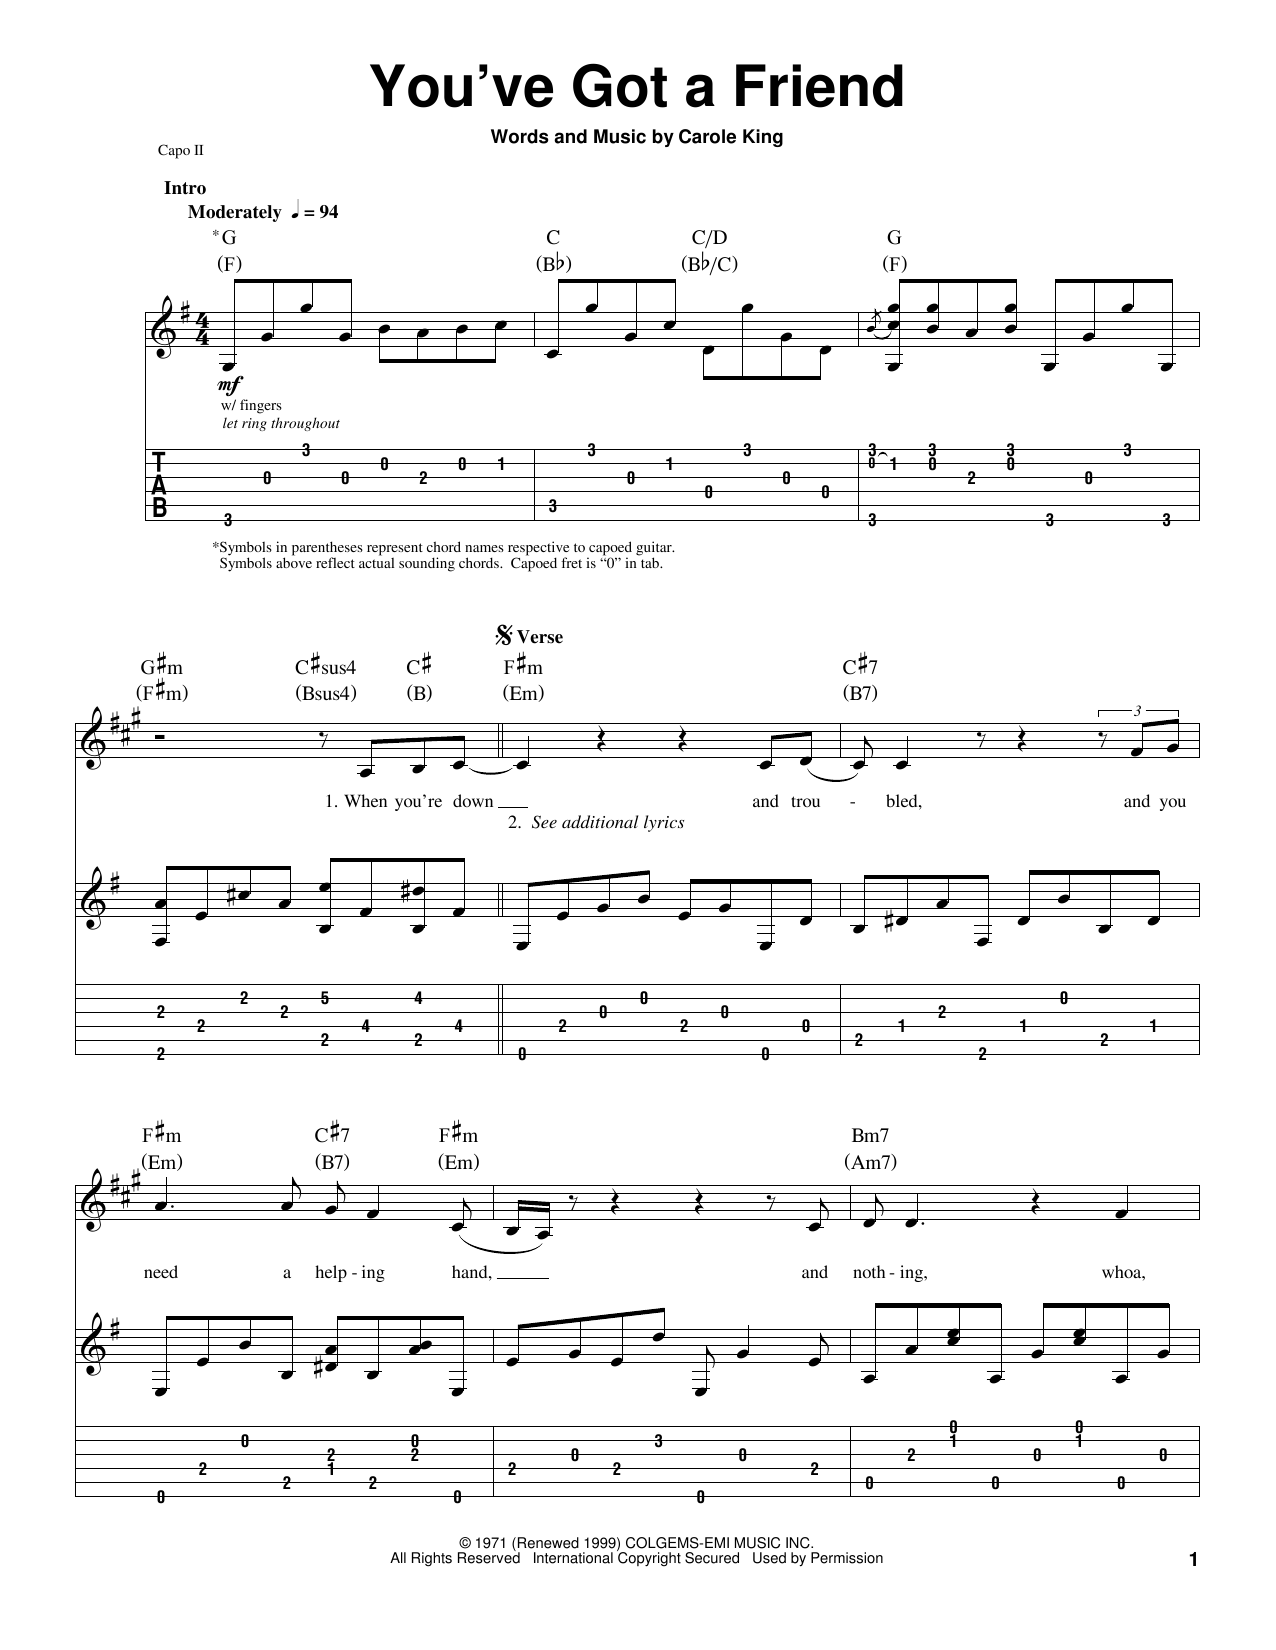 James Taylor You've Got A Friend sheet music notes and chords. Download Printable PDF.